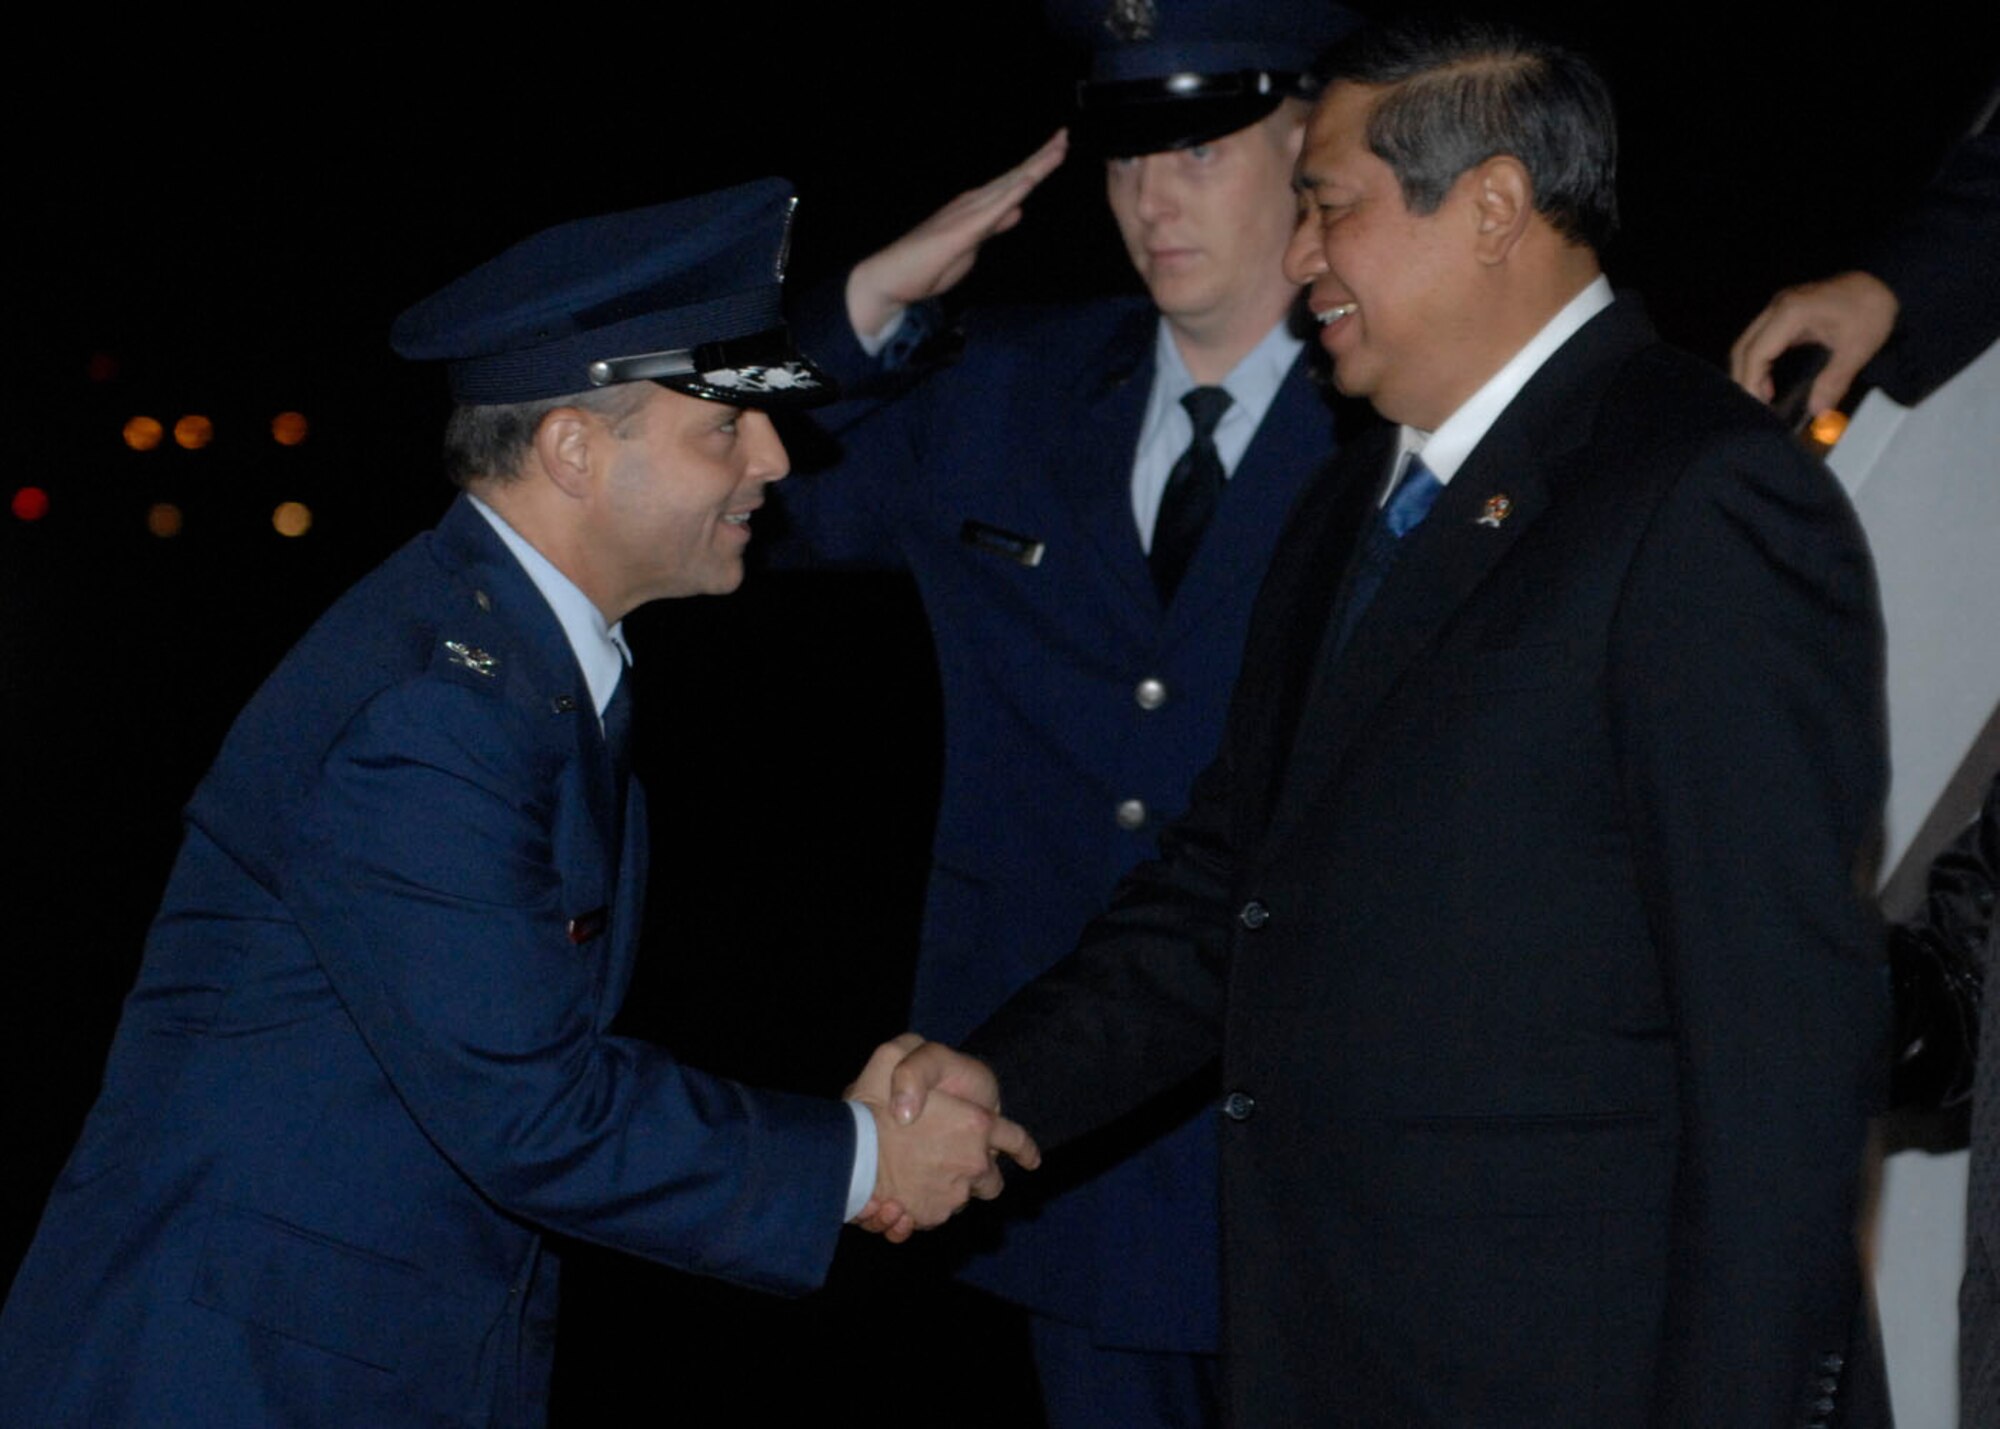 Colonel Eric A. Snadecki, 316th Wing vice commander, greets Indonesian President Susilo Bambang Yudhoyono at Andrews Air Force Base Md.,  Nov.14, 2008, for the two-day G20 Summit at the White House in Washington.  The summit, hosted by U.S. President George W. Bush, will bring together world leaders to discuss the increasing global financial crisis, its causes and efforts to resolve it.  (U.S. Air Force photo by Airman 1st Class Melissa V. Rodrigues)